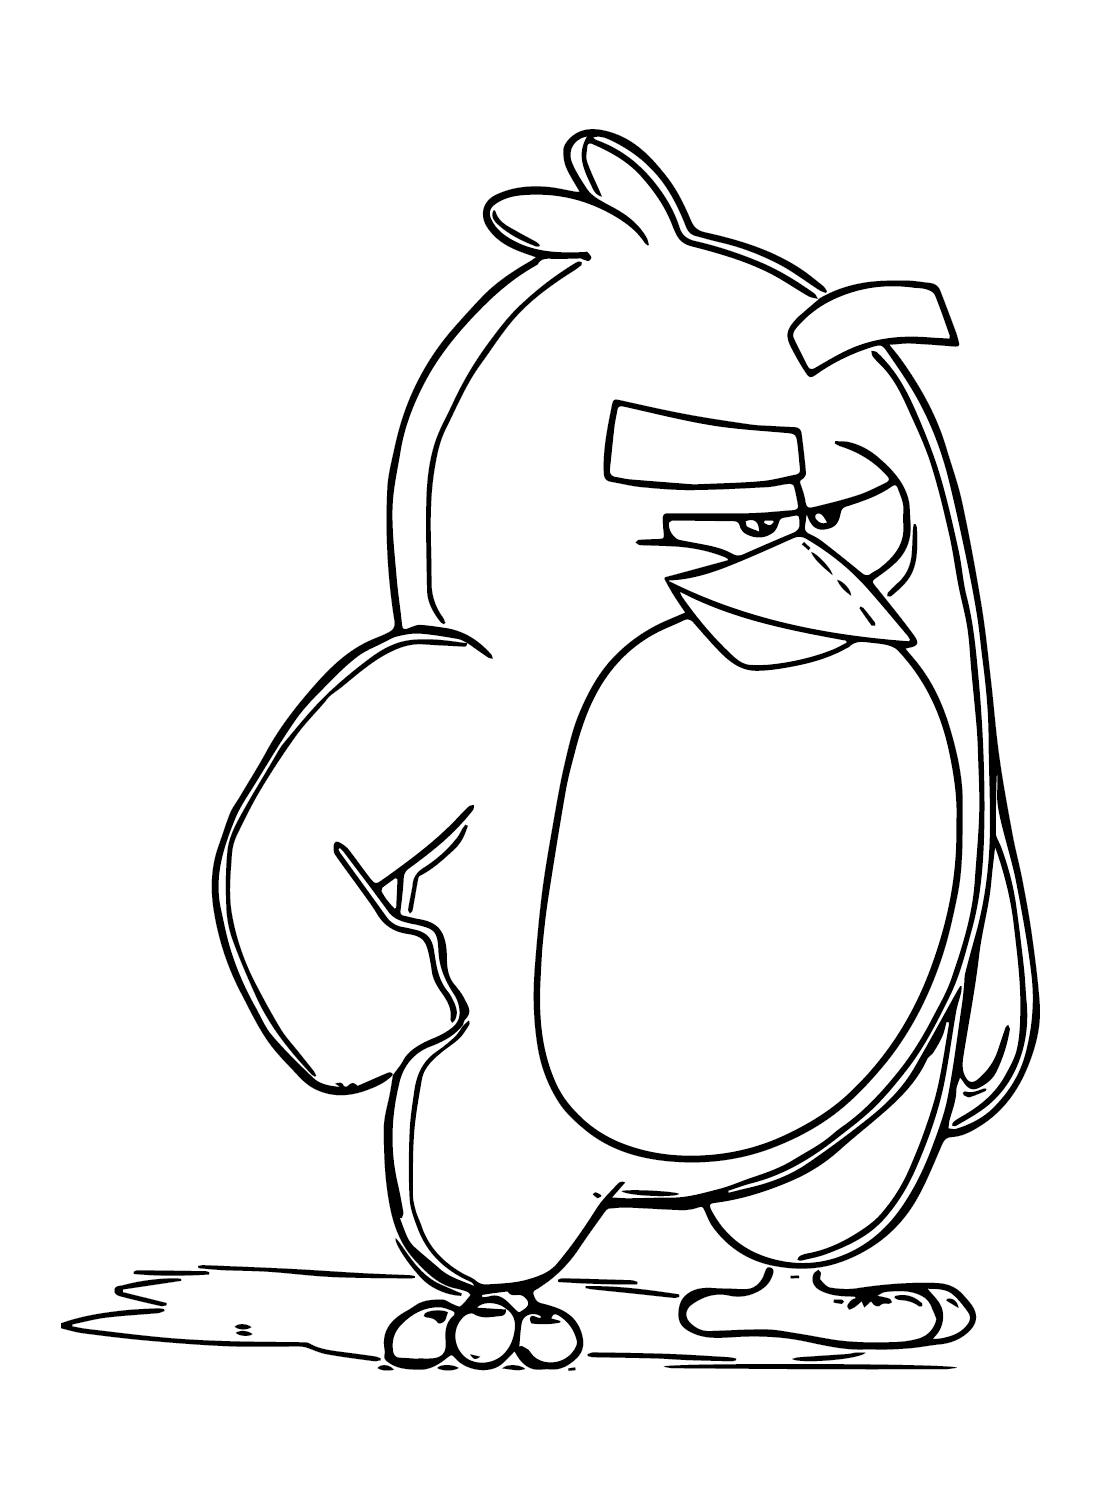 Red (Angry Bird) for Kids Coloring Page